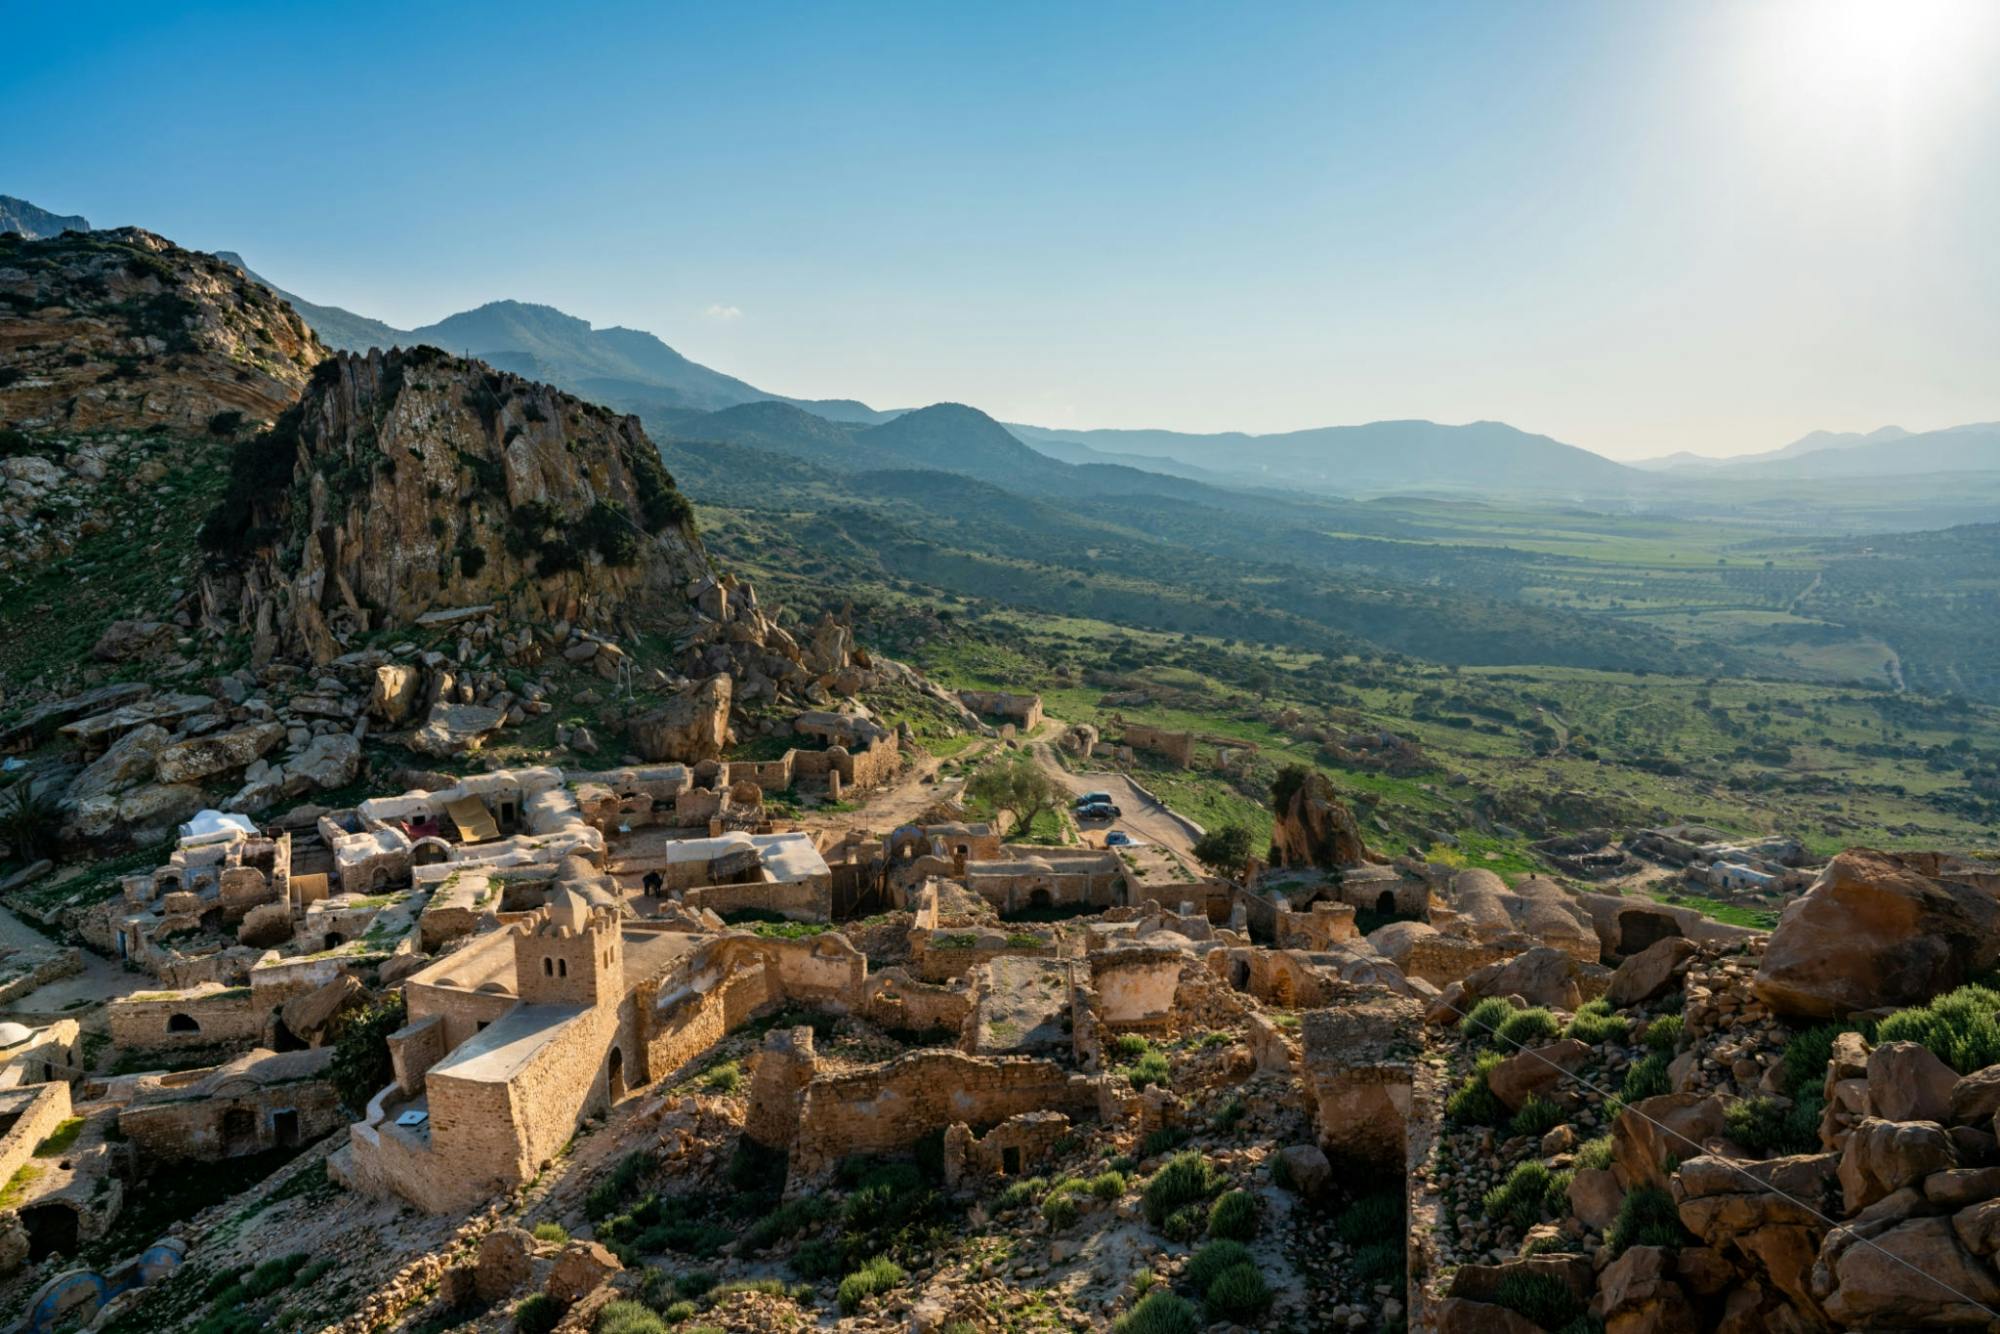 Berber village guided tour from Mahdia